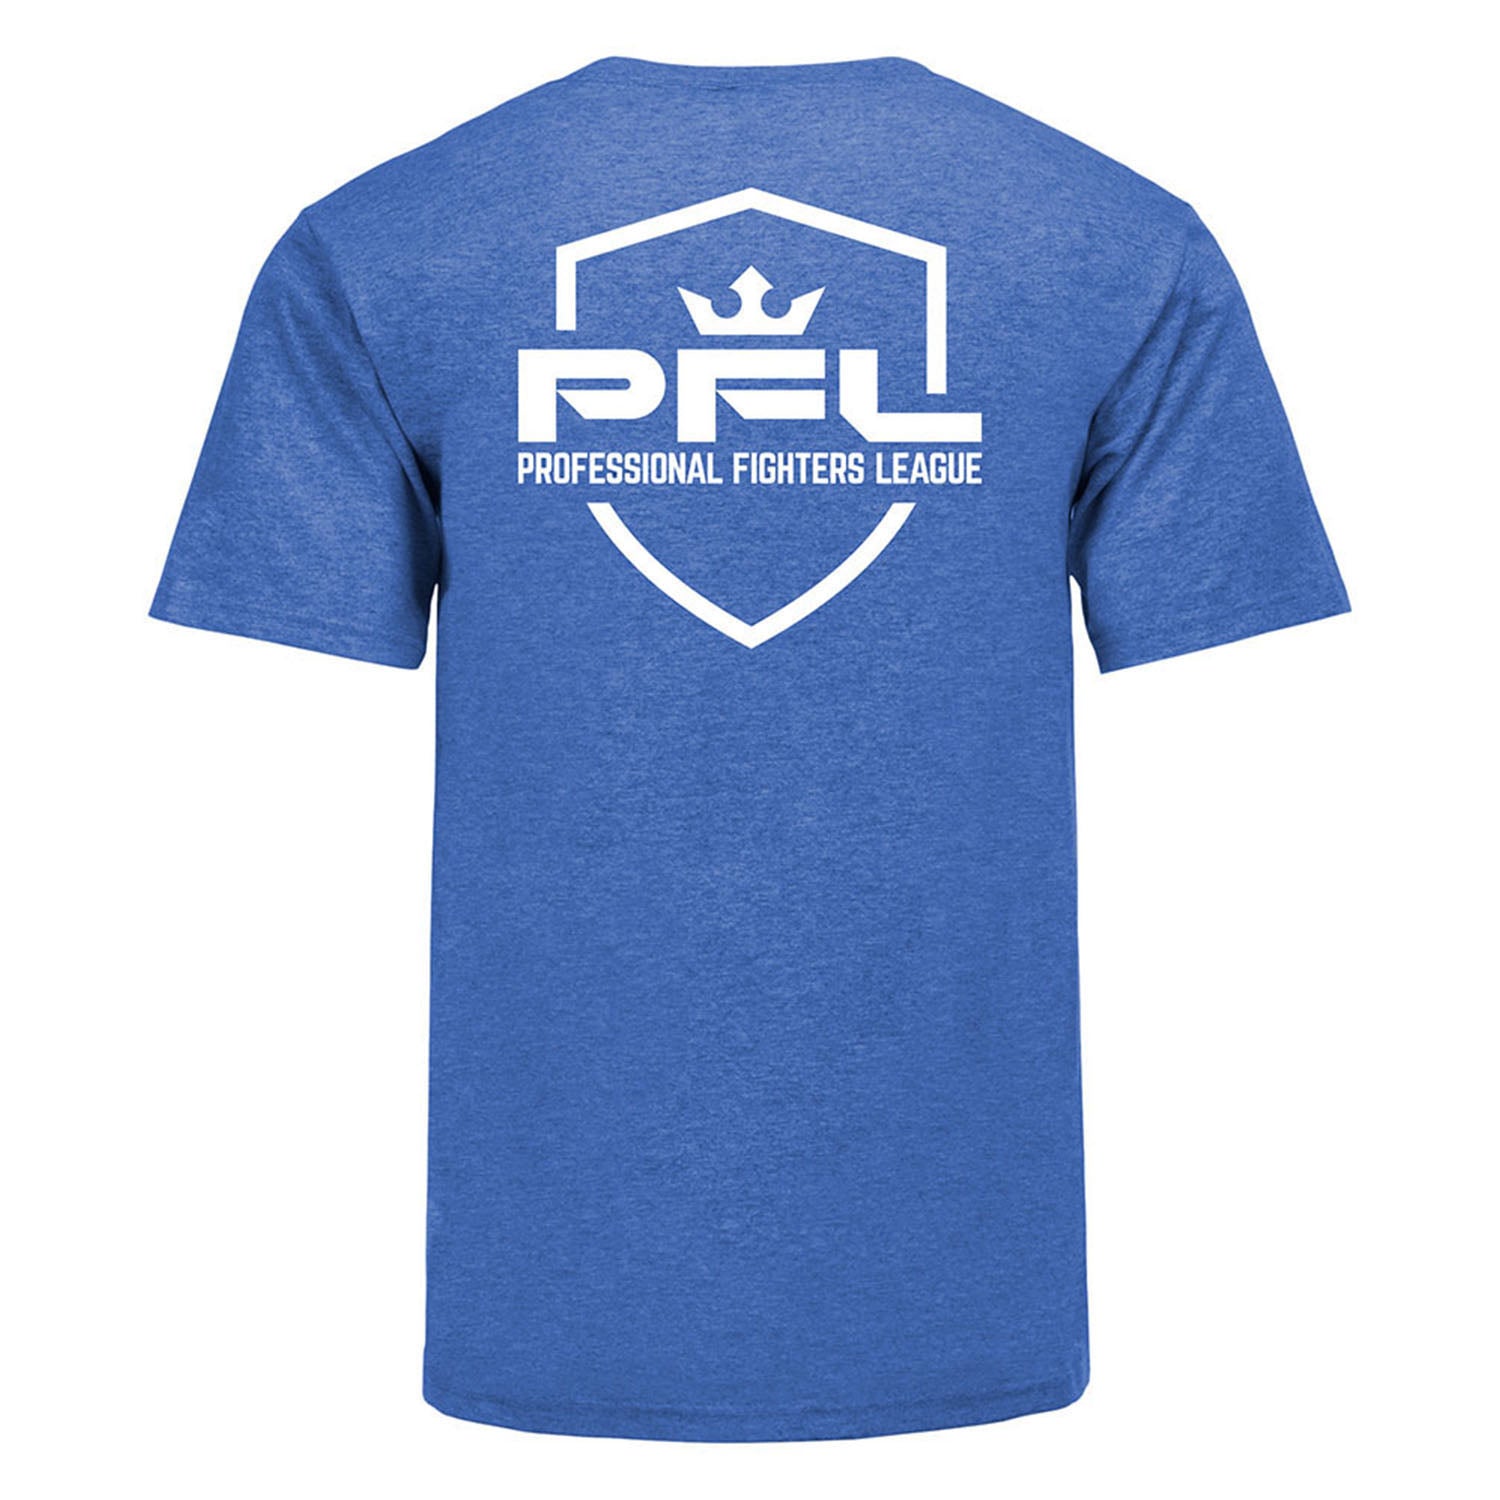 PFL Logo T-Shirt in Blue - Back View